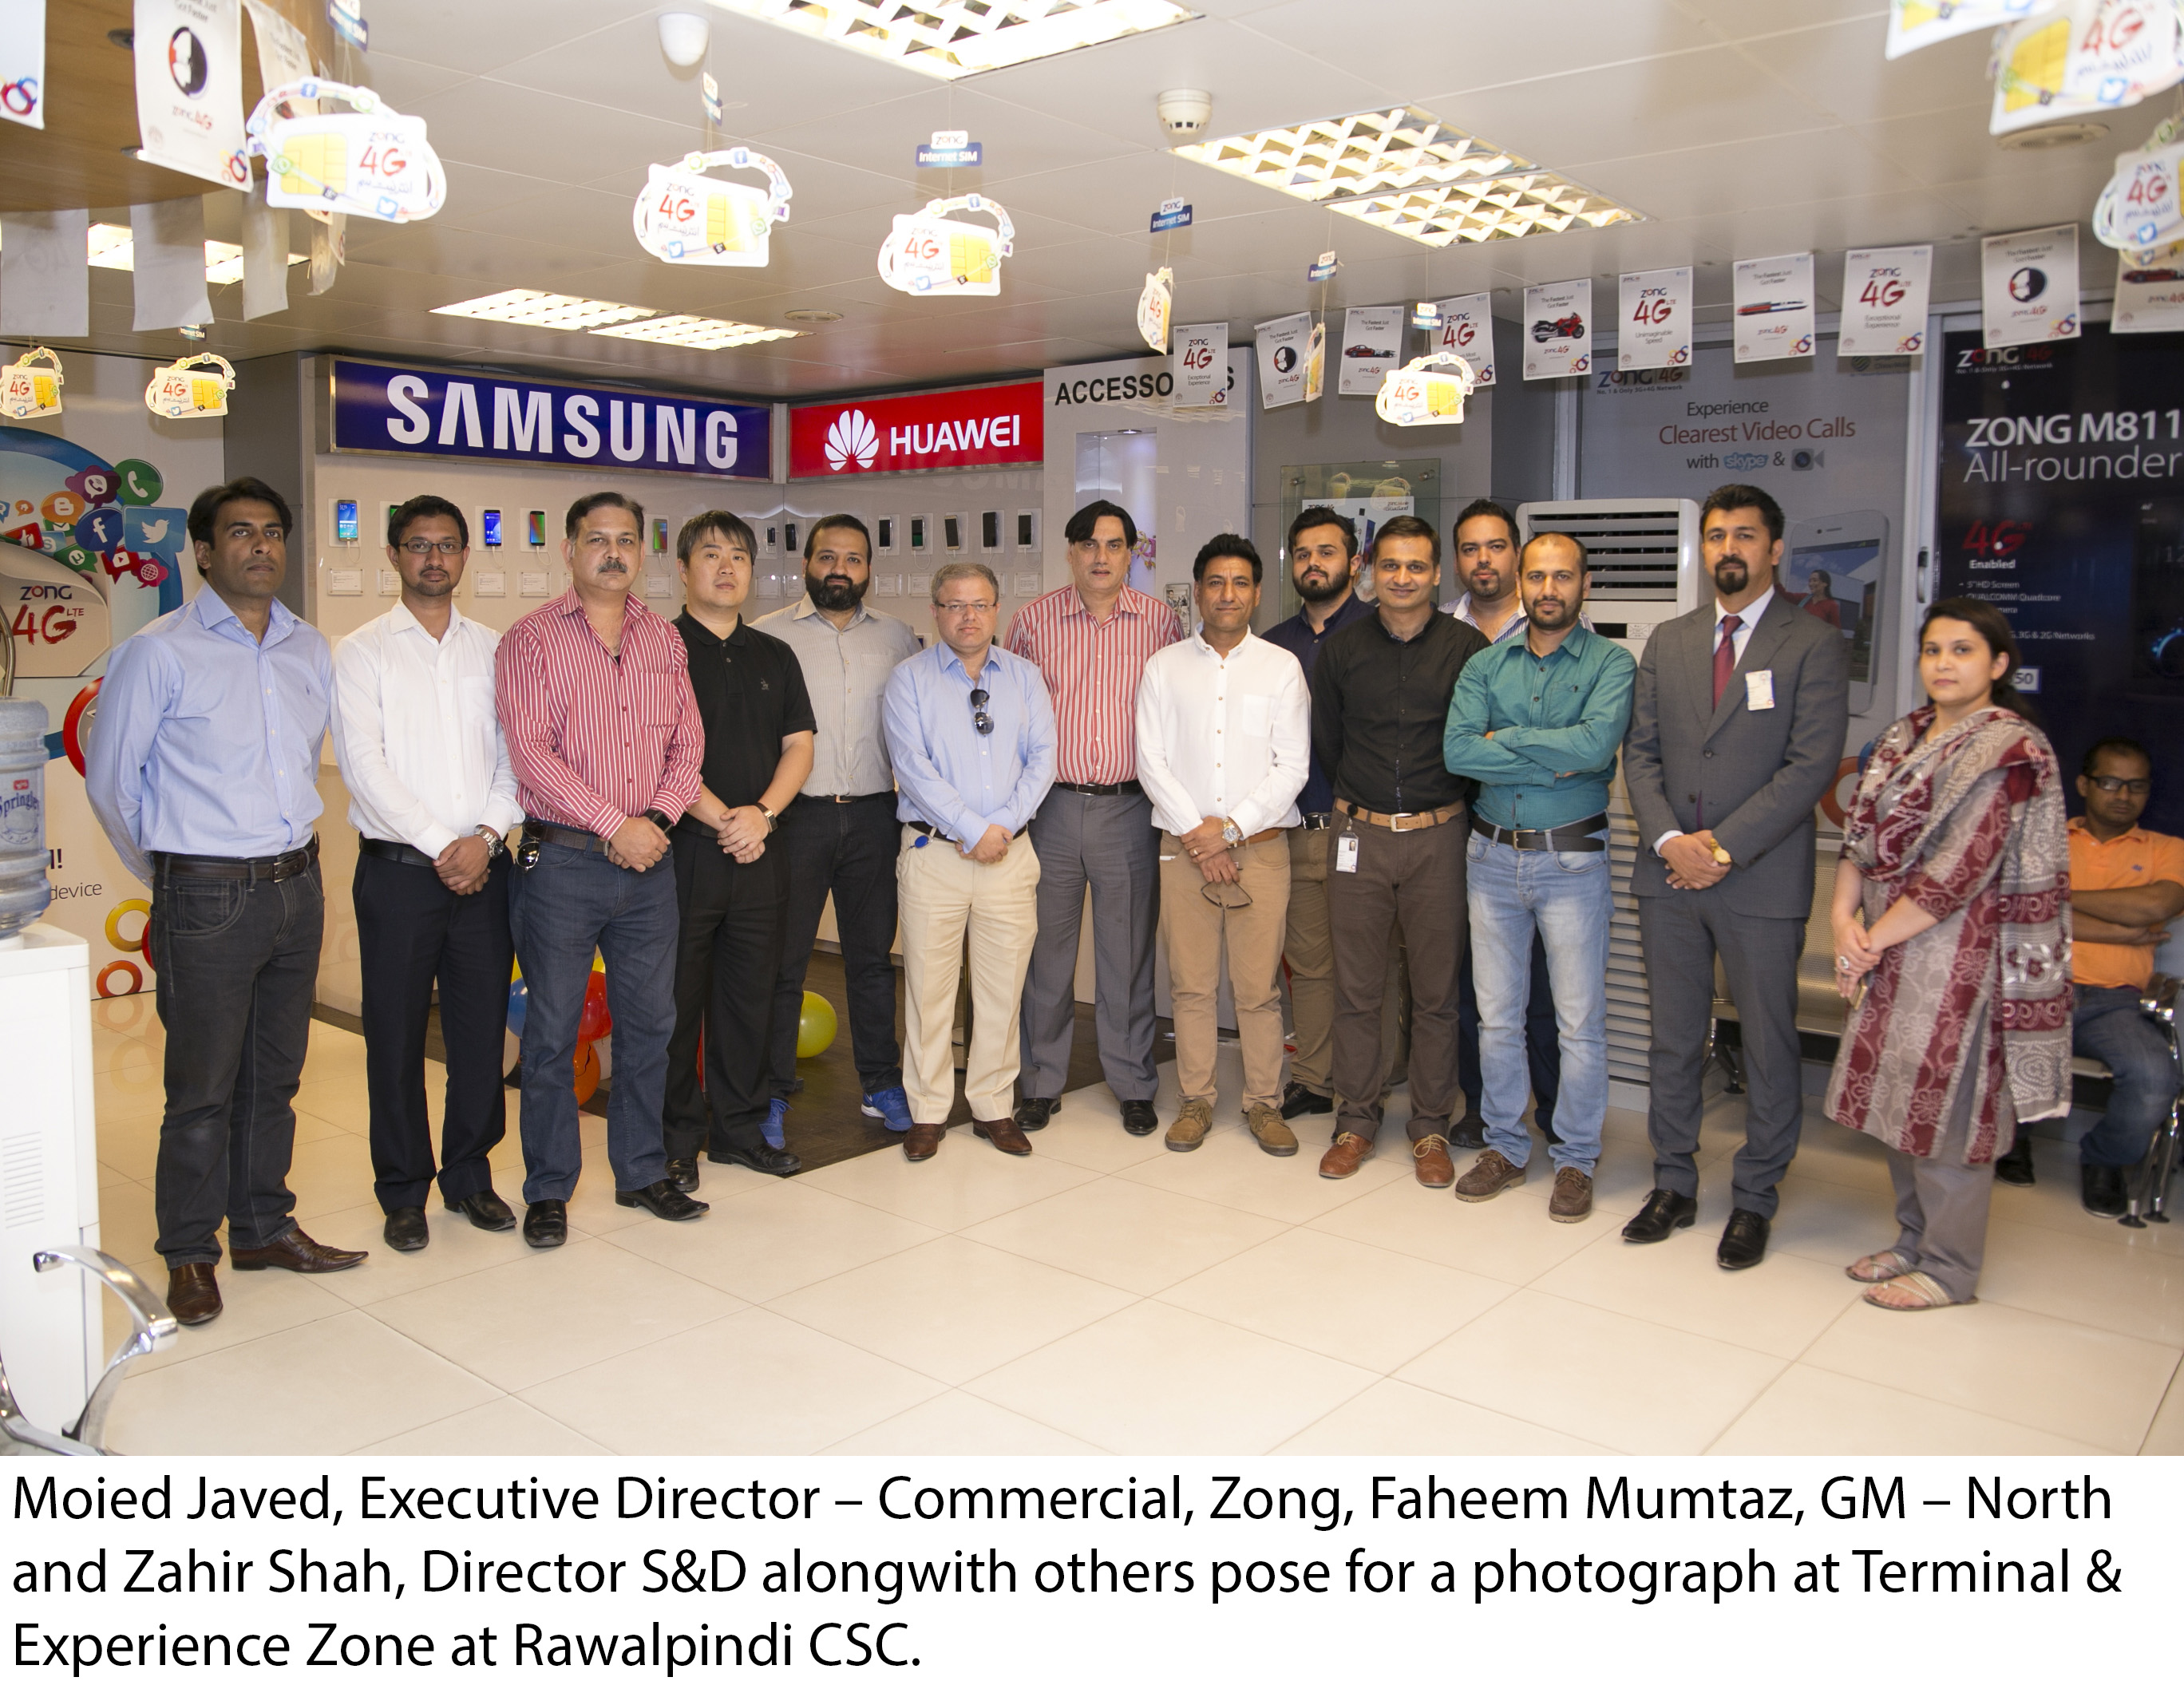 Zong set-up state-of-the-art Terminal & Experience Zong at CSC